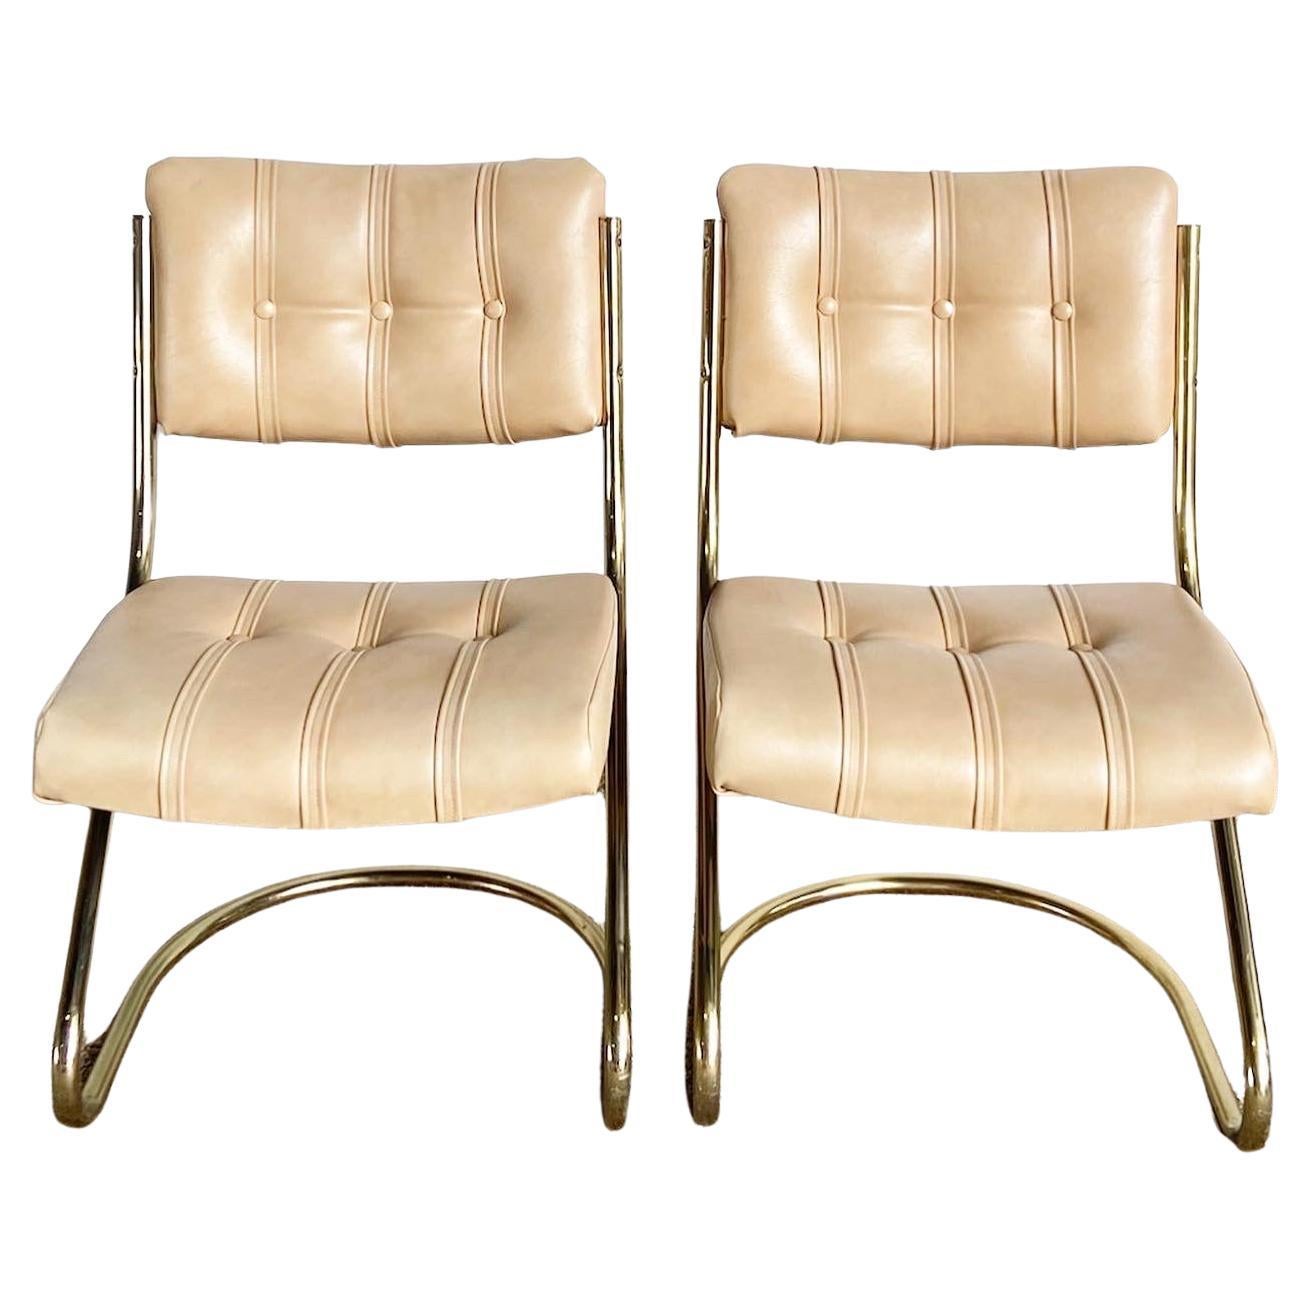 Mid Century Modern Gold and Tan Tufted Cantilever Chairs by Chromcraft - a Pair